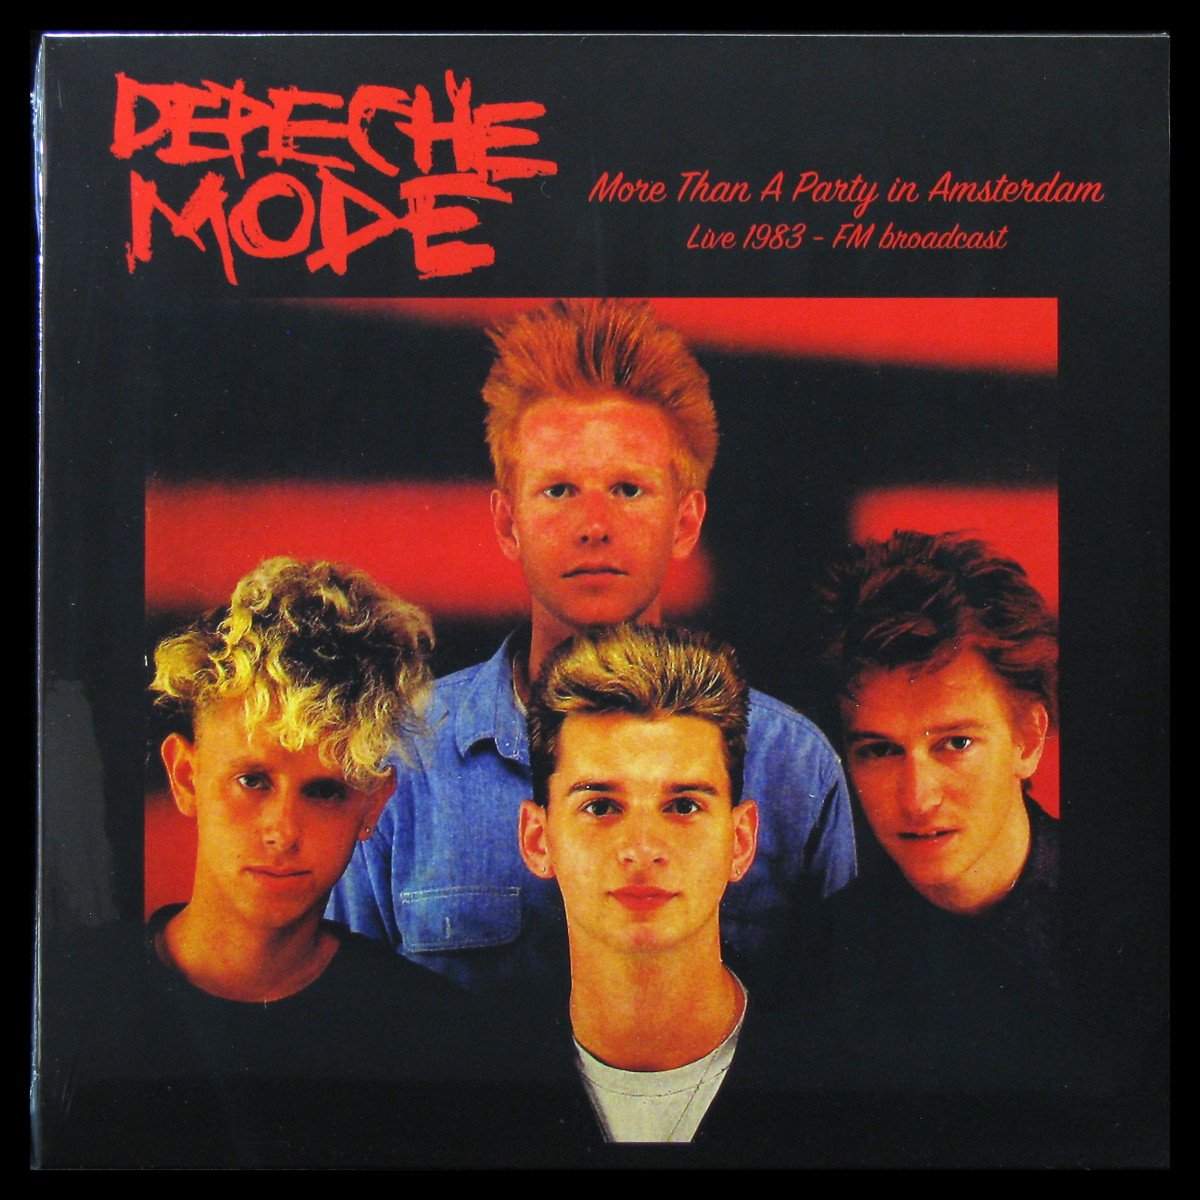 LP Depeche Mode — More Than A Party In Amsterdam (Live 1983 - FM Broadcast) фото